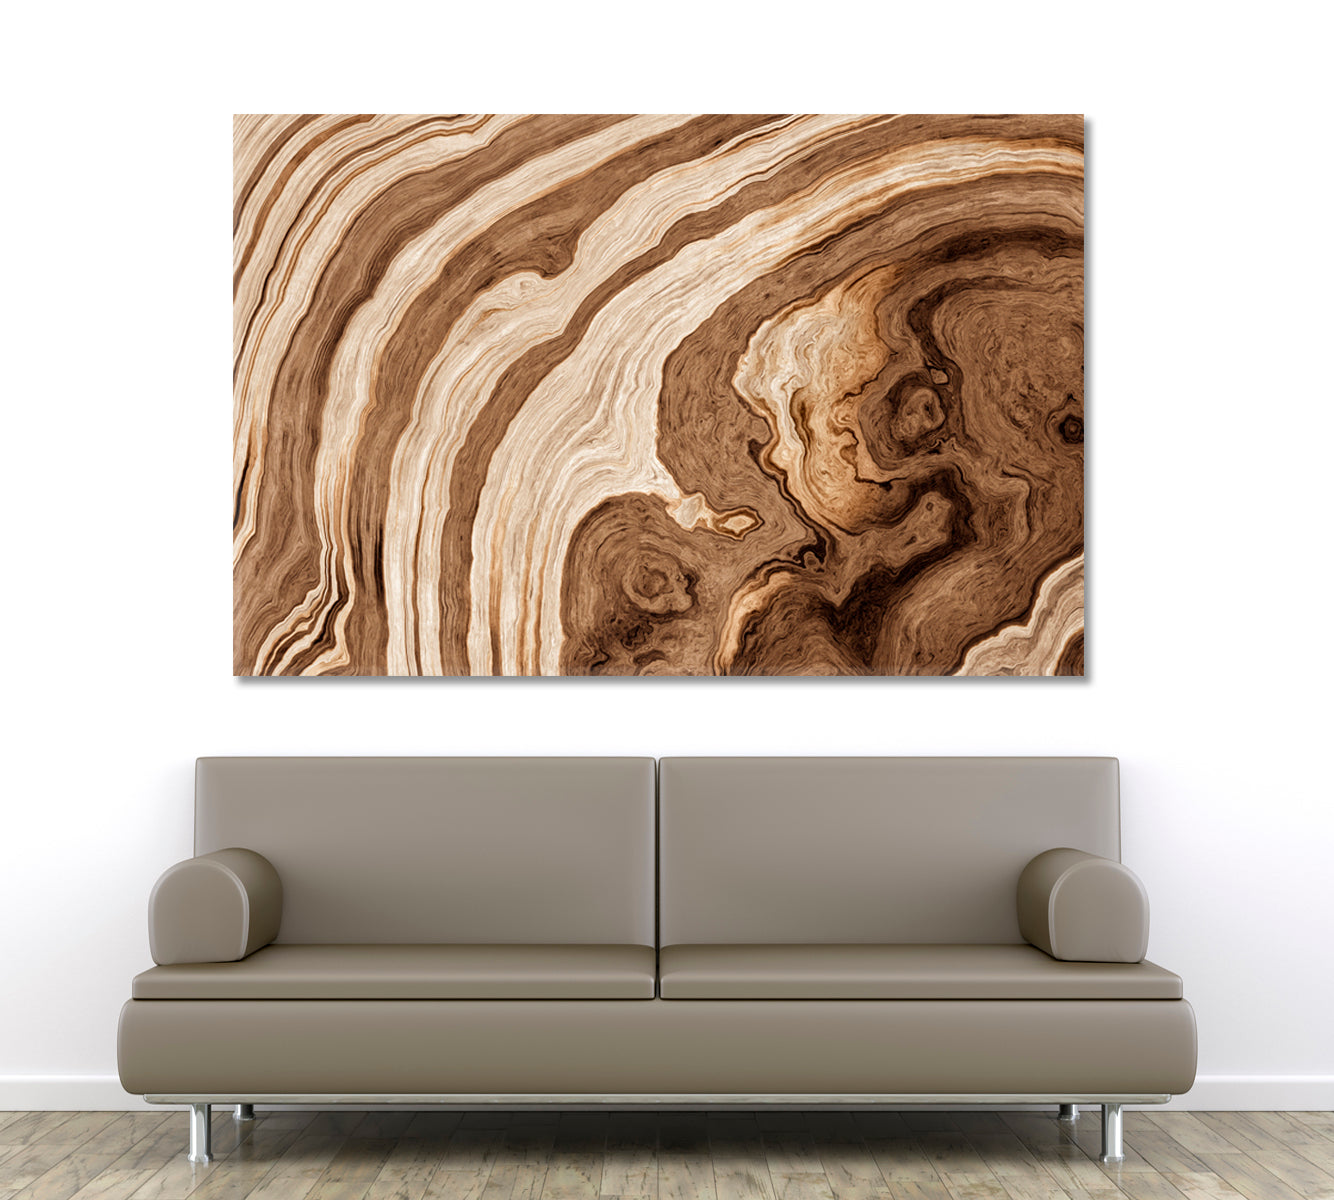 ROOTS Texture Old Wood Tree Wavy Lines Age Rings Abstract Driftwood Abstract Art Print Artesty 1 panel 24" x 16" 